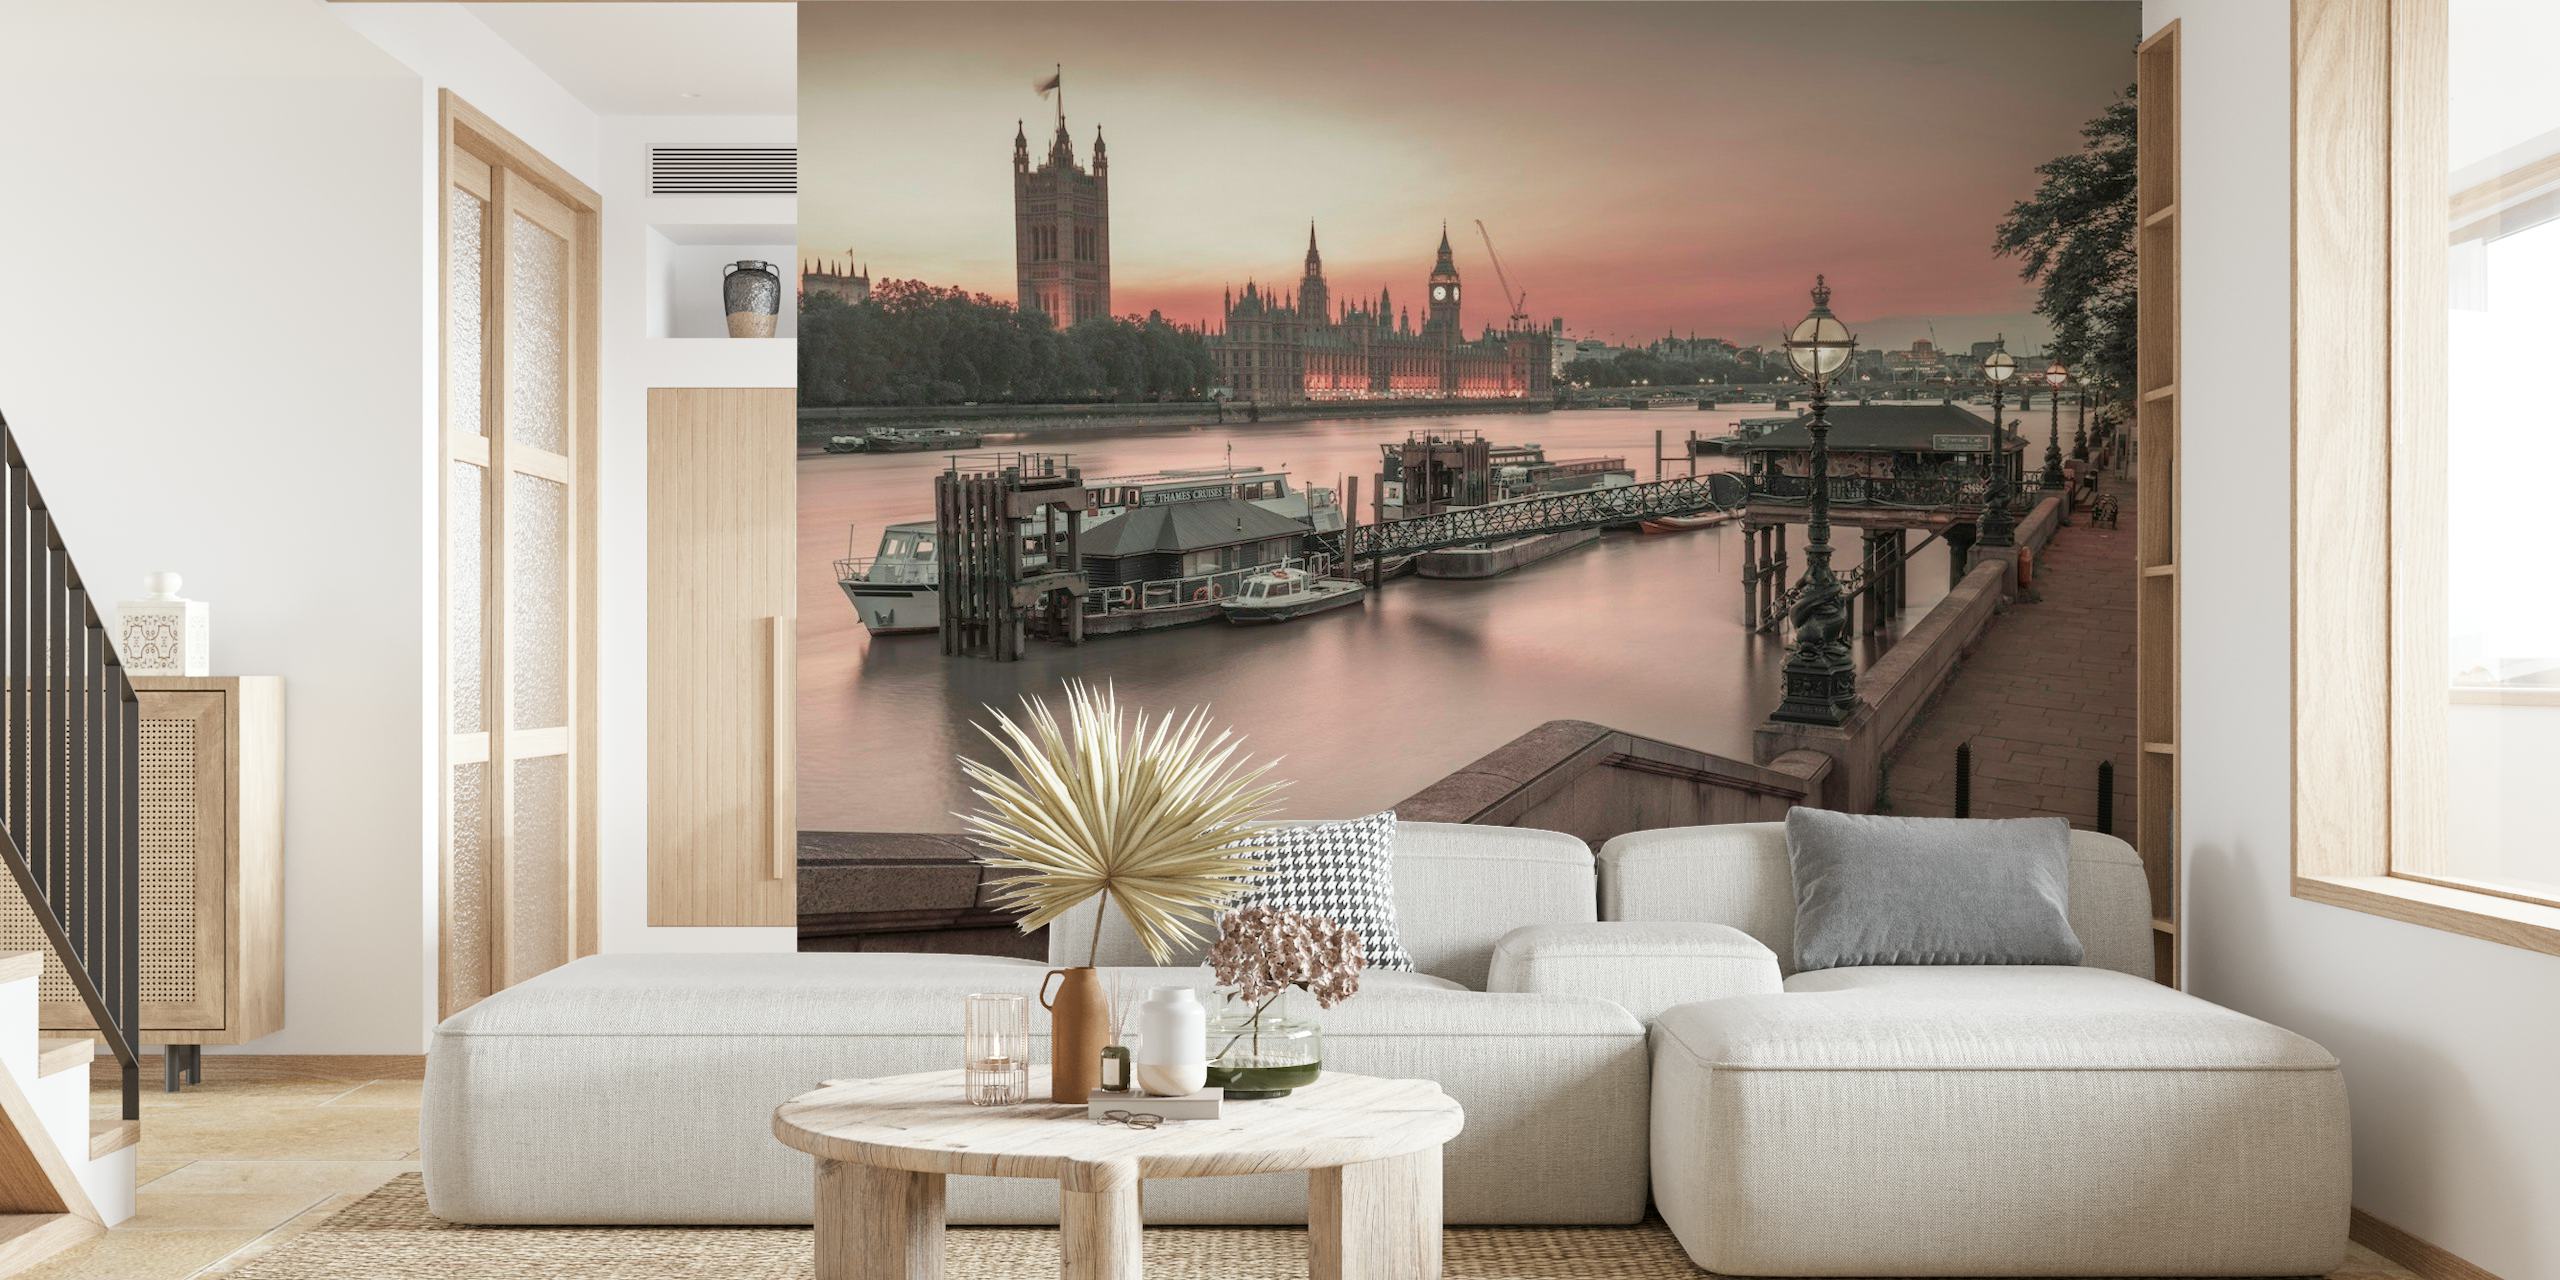 London skyline wall mural with Houses of Parliament and Big Ben at dusk